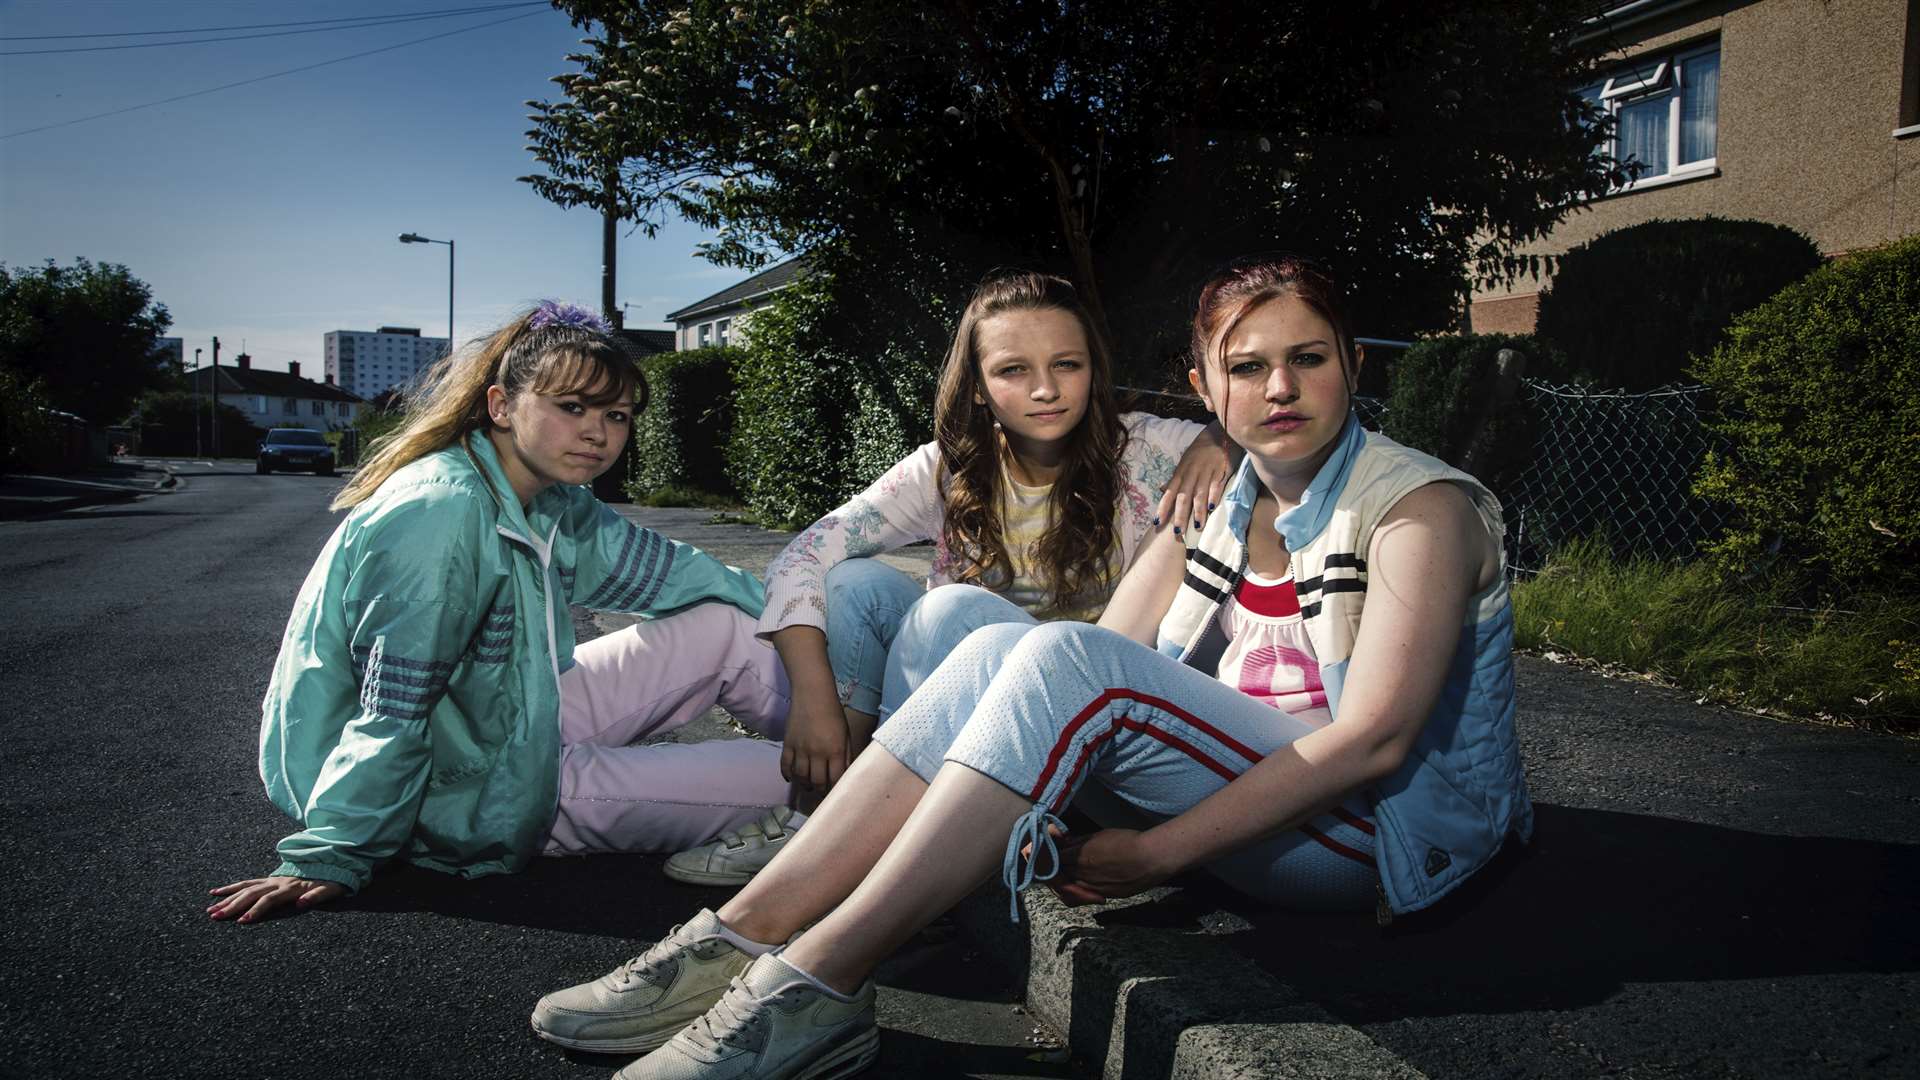 The programme, Three Girls, aired on BBC One